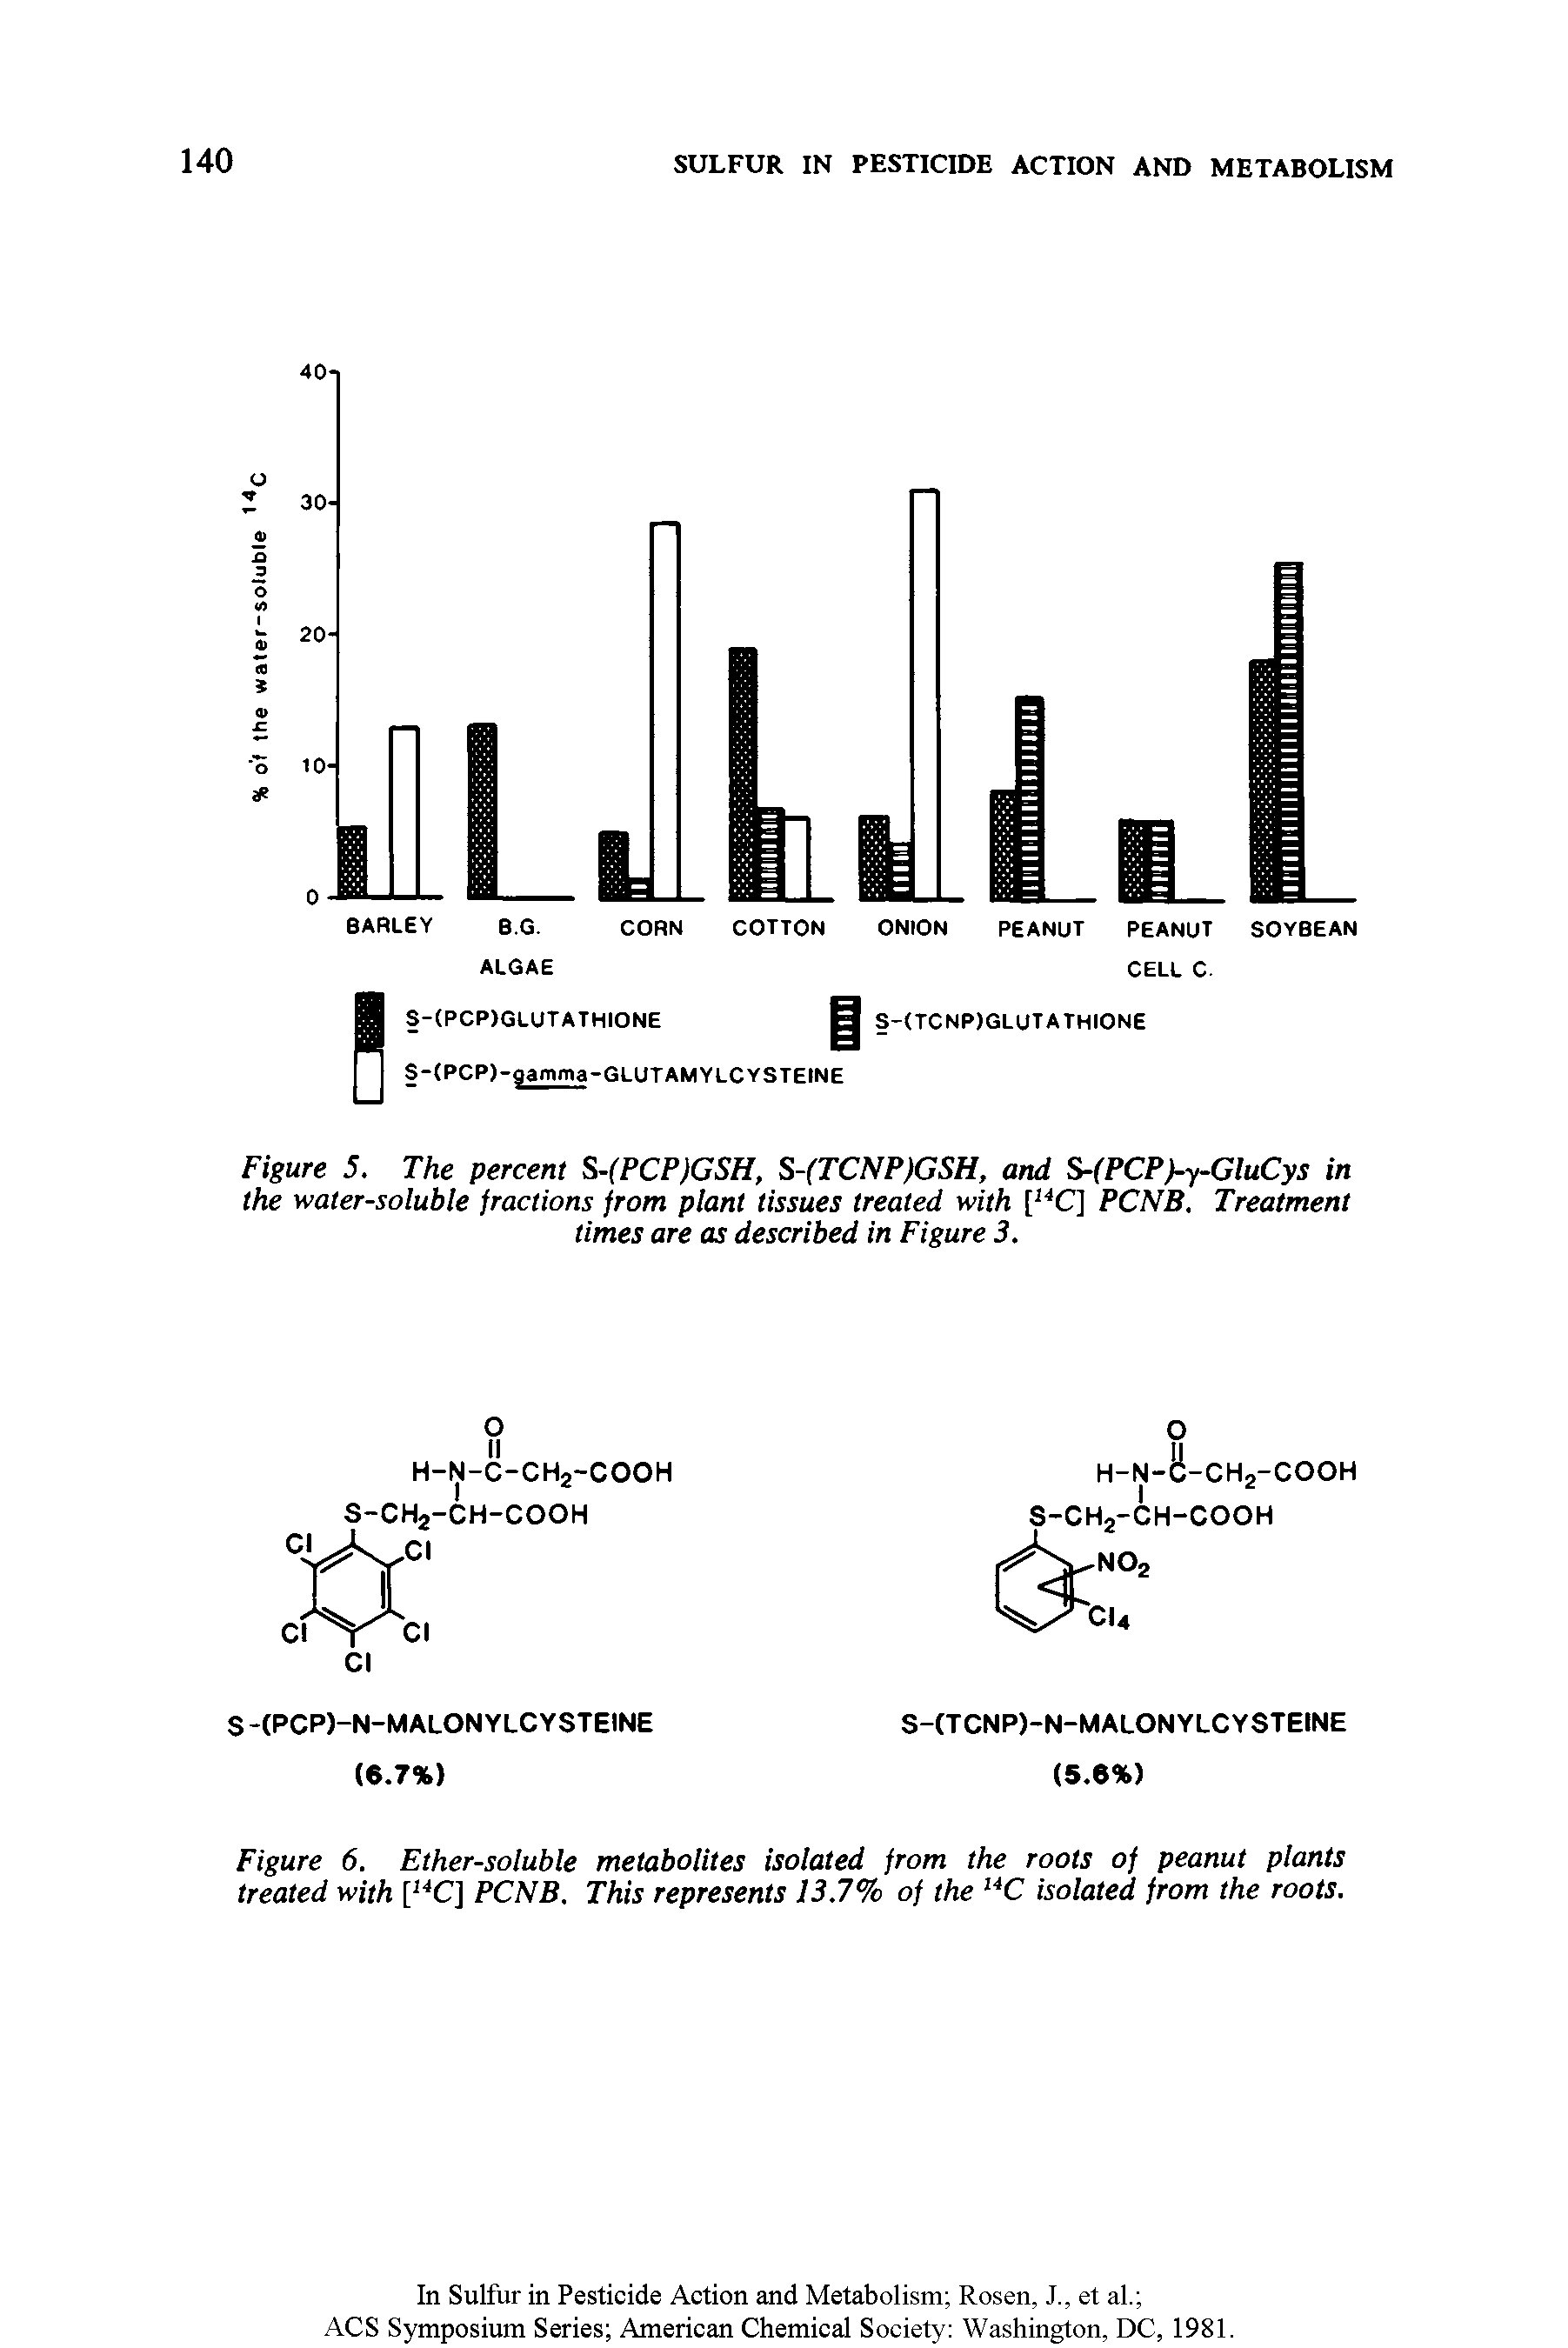 Figure 6. Ether-soluble metabolites isolated from the roots of peanut plants treated with FCNB. This represents 13.7% of the C isolated from the roots.